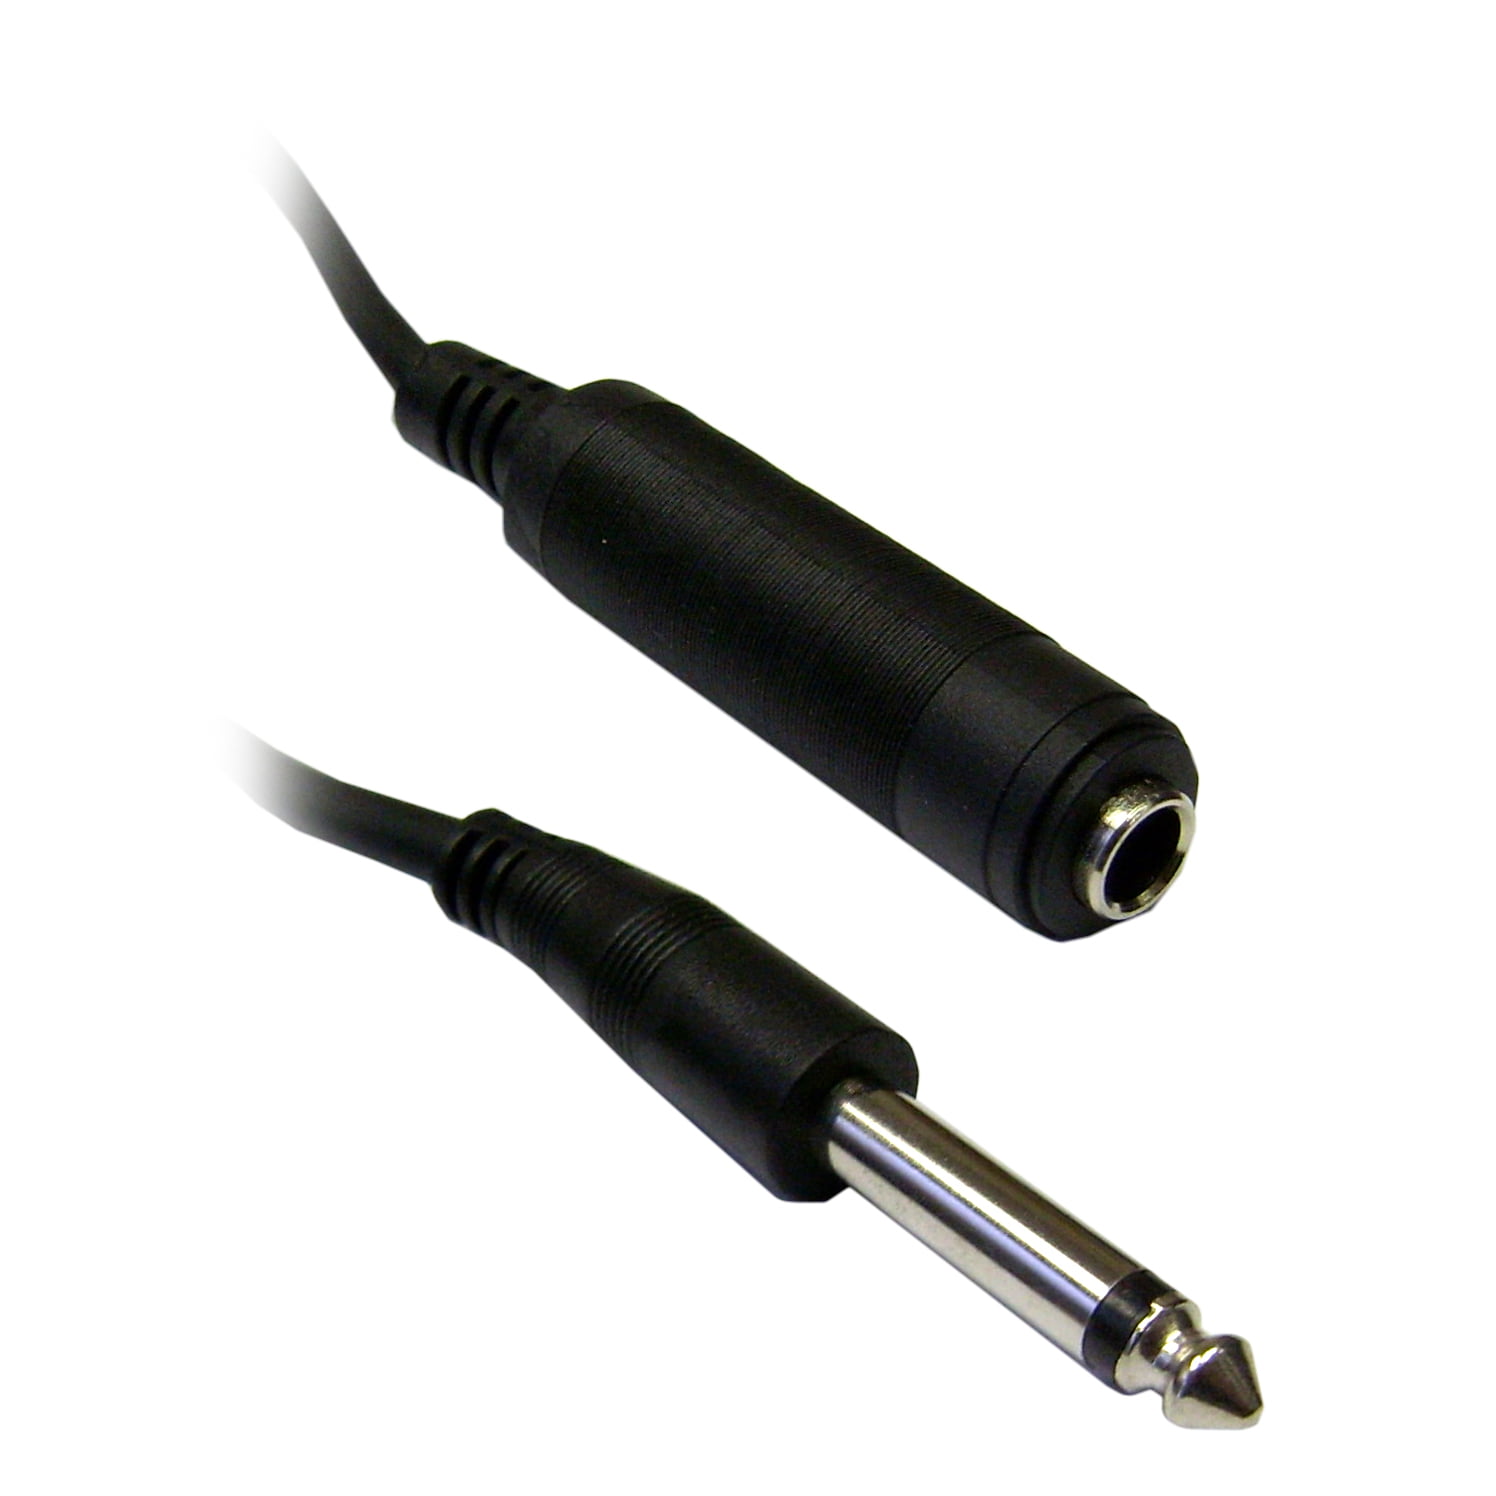 SF Cable 1/4 Stereo Male to Male Cable 6 feet 